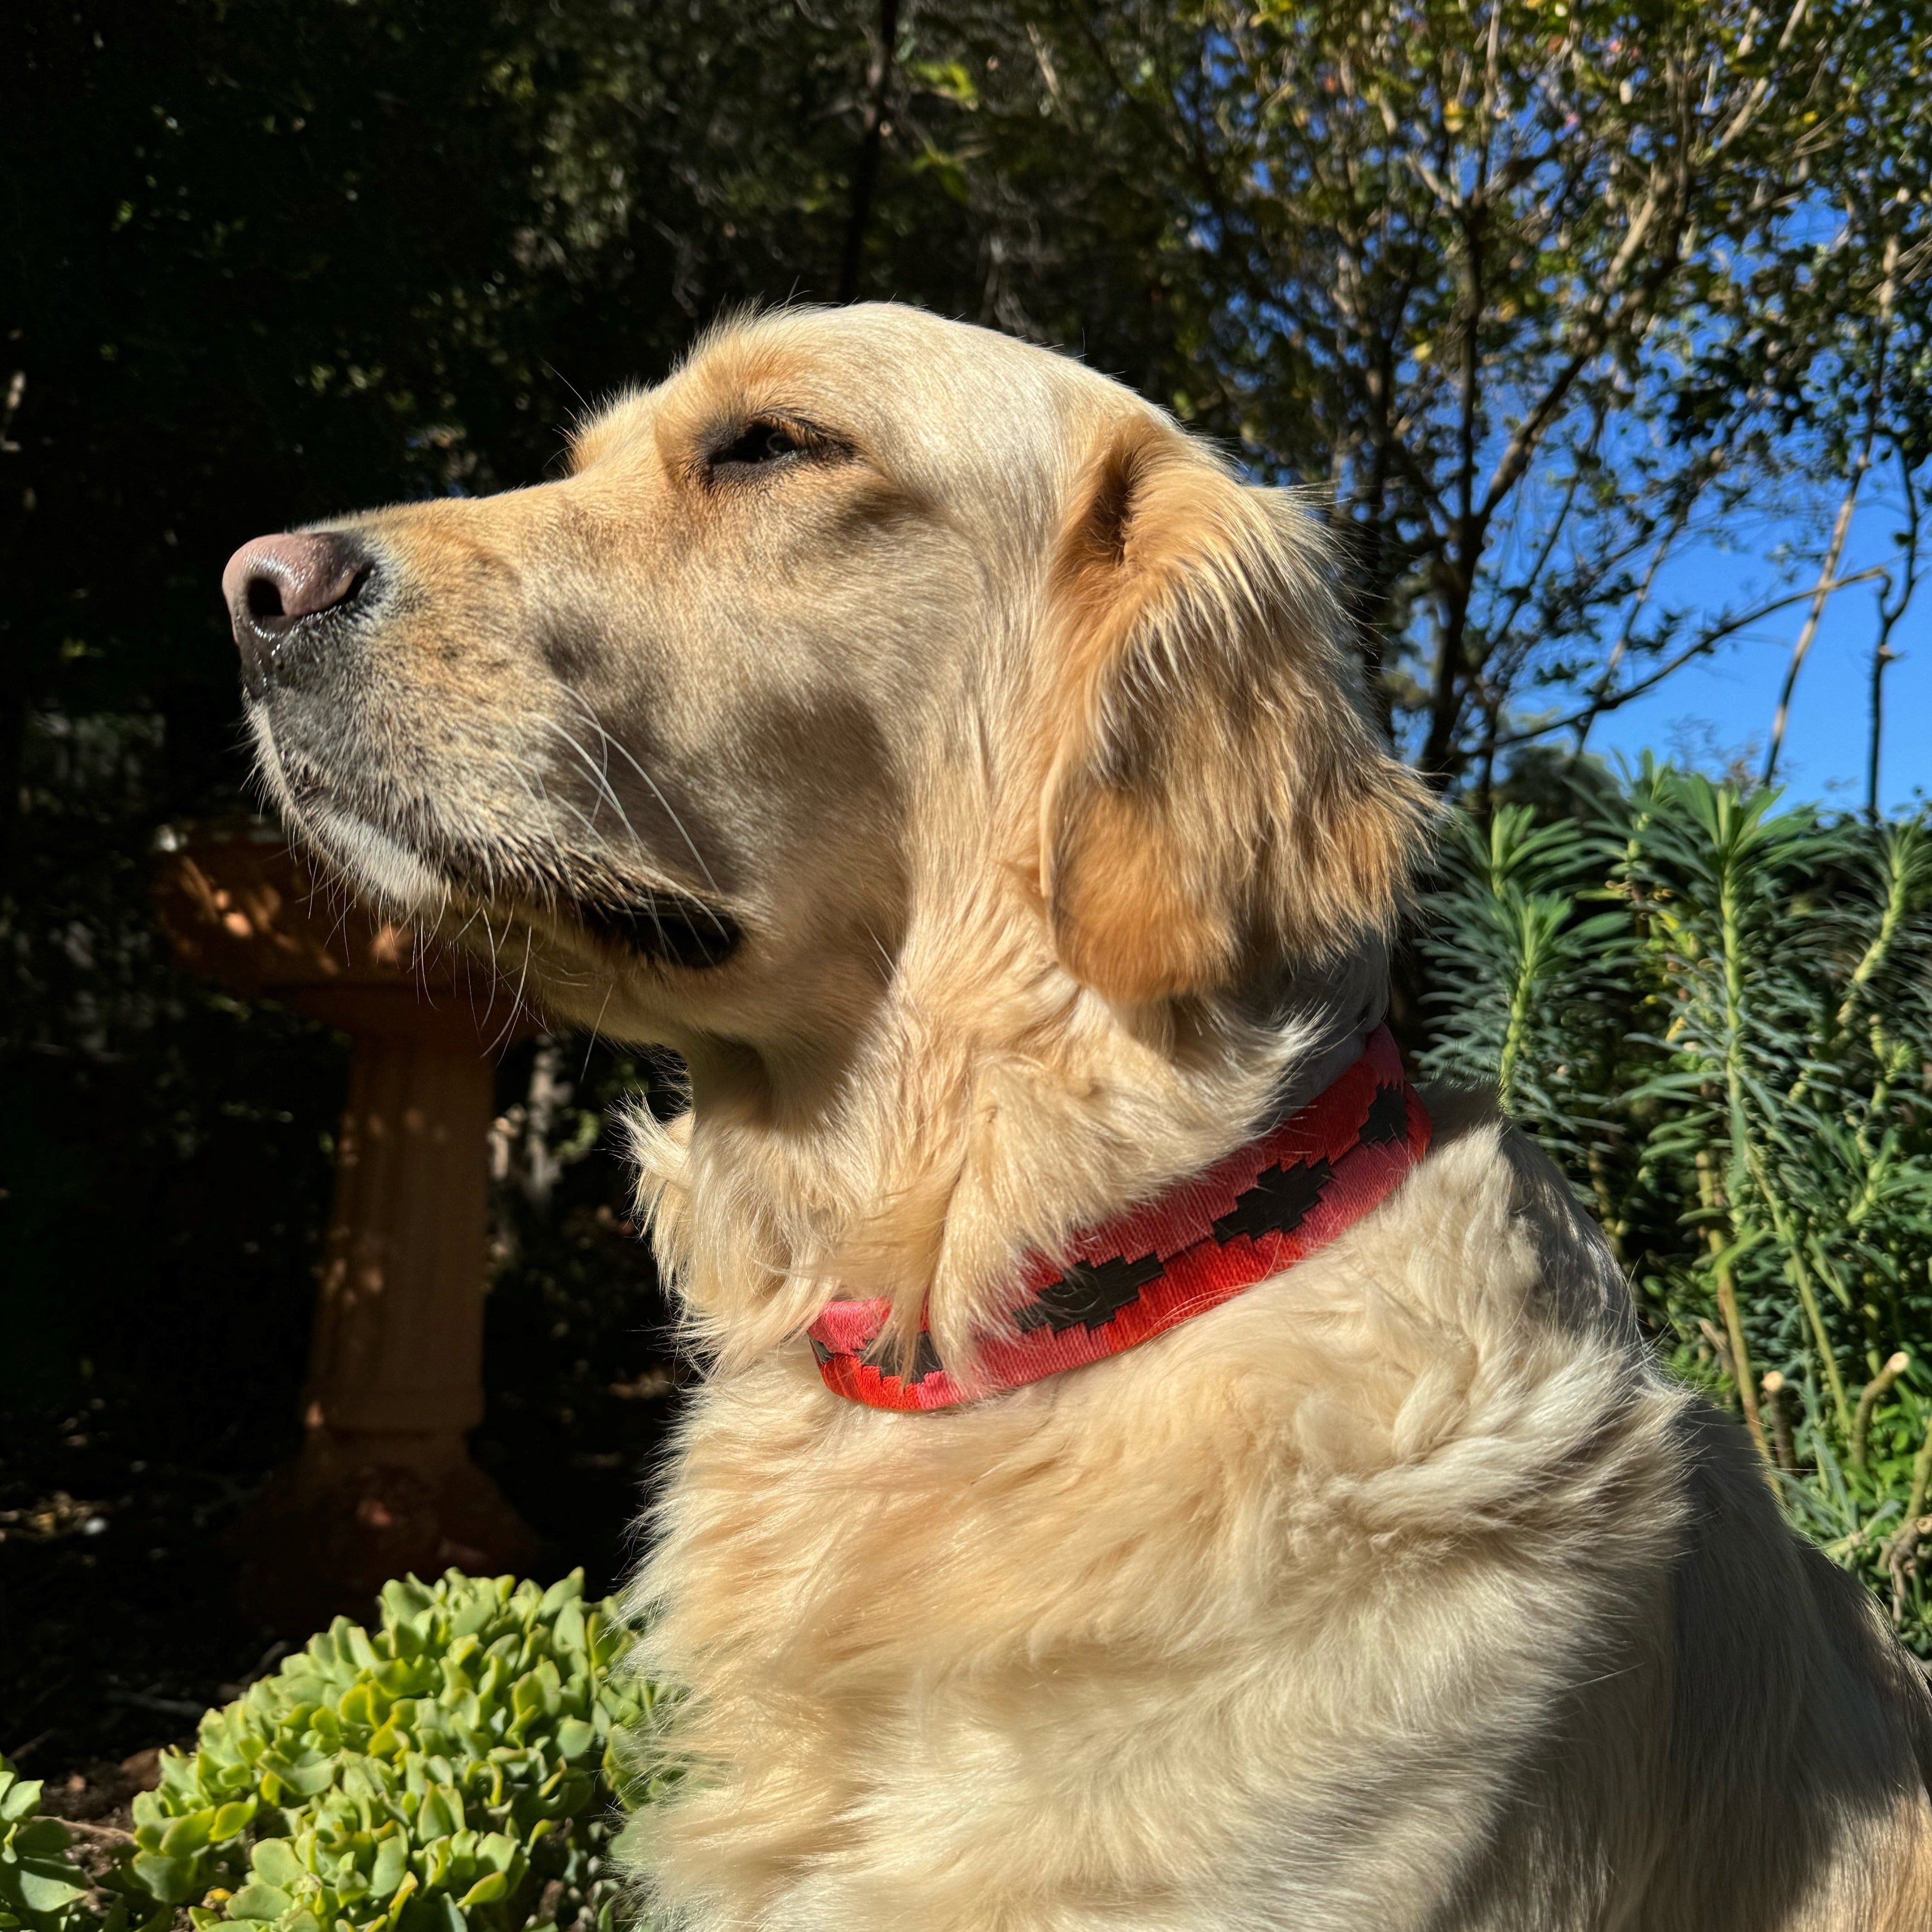 A golden retriever with a red Polo Collar - Bombay by Georgie Paws sits outdoors, basking in the sunlight. The dog looks calm and content, facing left with its eyes partially closed. The background features lush green foliage, a birdbath, and a clear blue sky, creating a peaceful, natural setting.